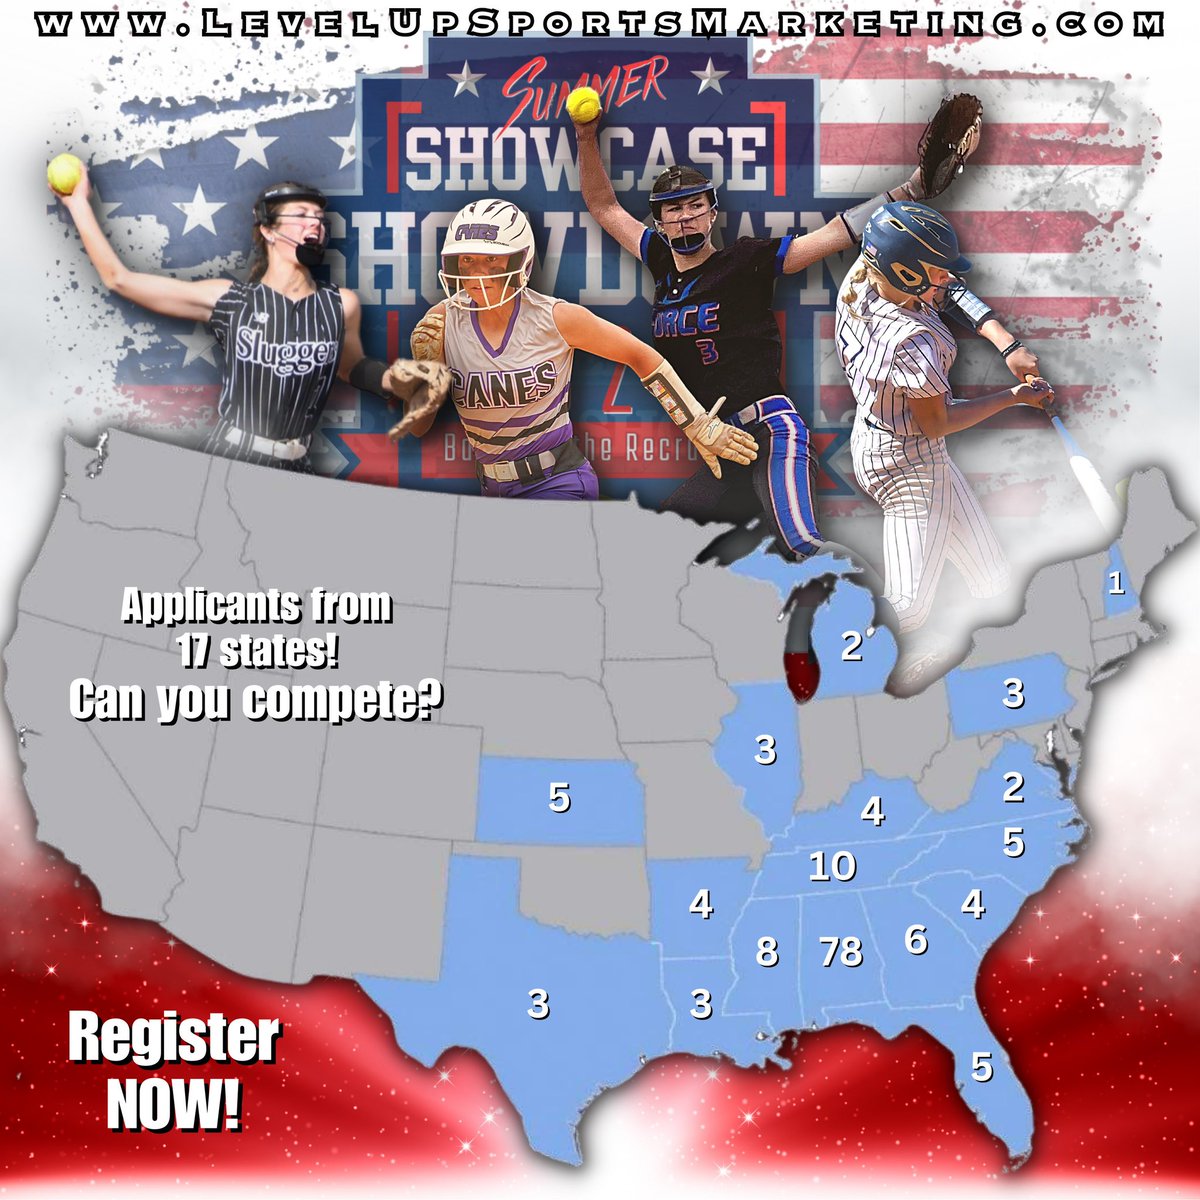 Athletes all over the eastern US applying to be part of the best showcase/exposure event of 2024! If you think you have it takes to compete against the #Top100 in the Showcase Showdown #BattleoftheRecruits register here-> levelupsportsmarketing.com